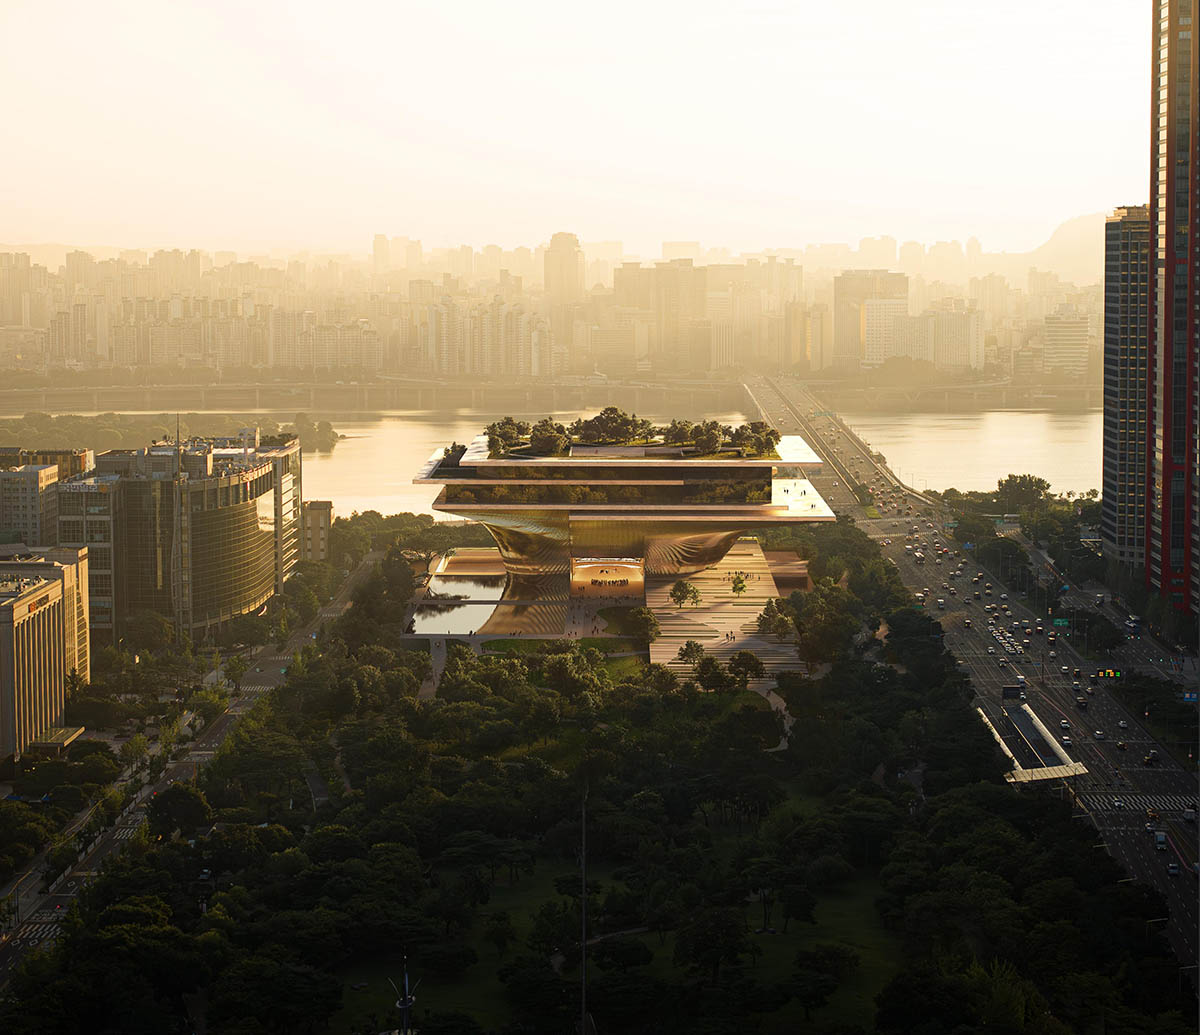 MAA, ZHA, DMP Architects among five winning designs for the 2nd Sejong Center For Performing Arts 